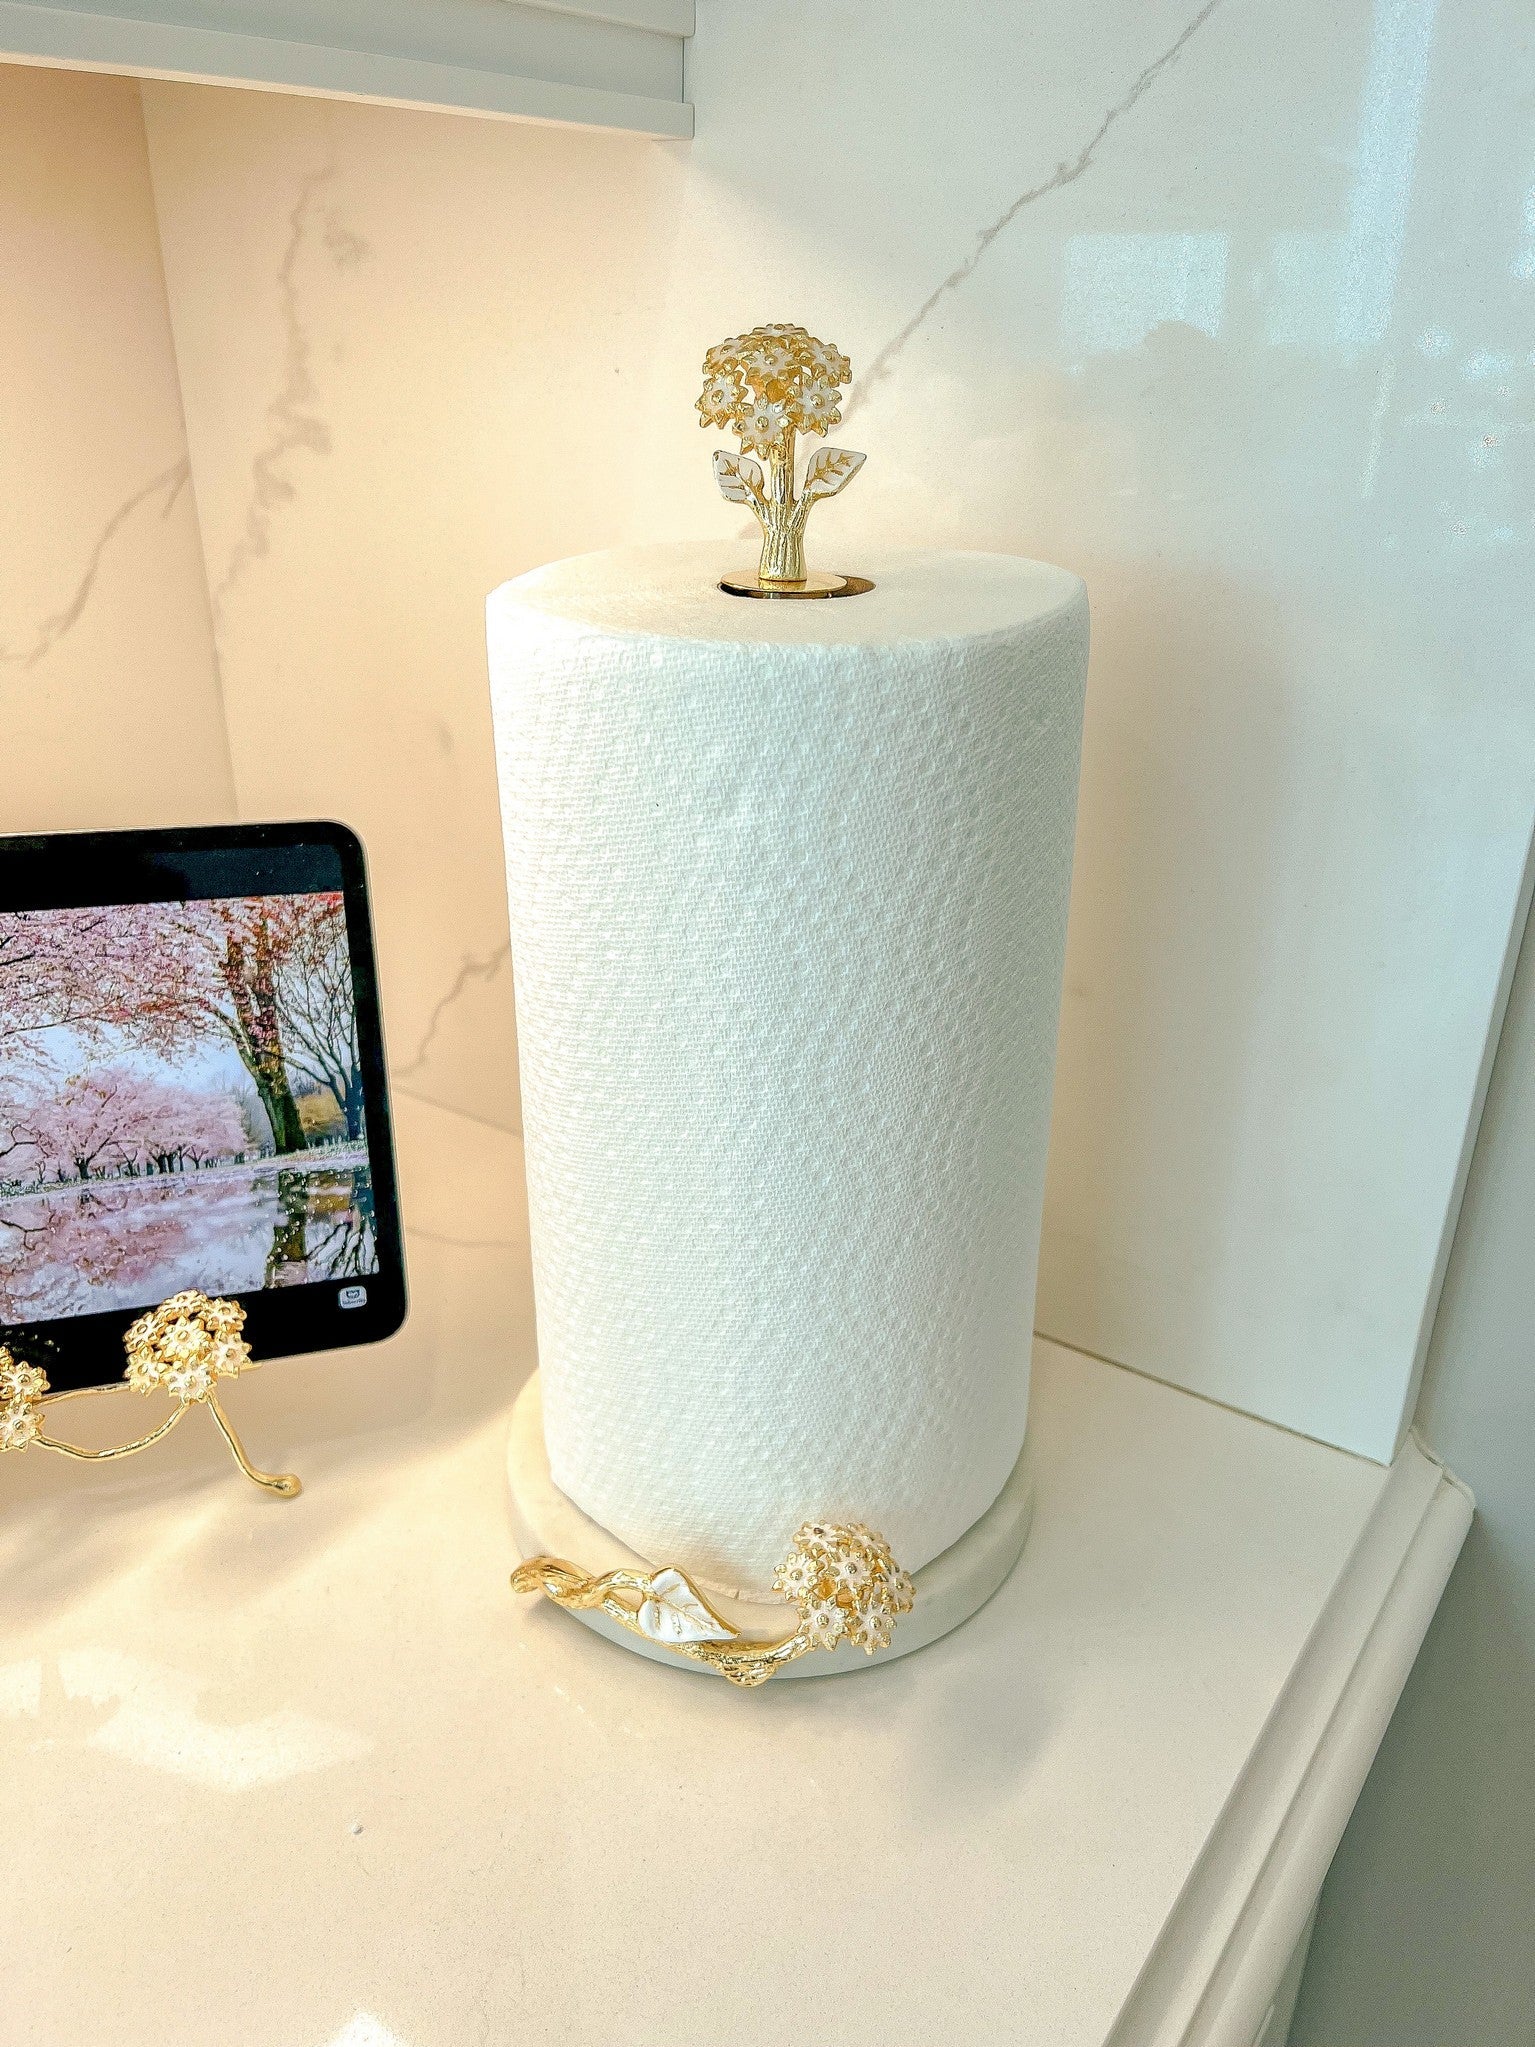 https://www.inspiremehomedecor.shop/wp-content/uploads/1688/10/find-the-best-prices-on-gold-paper-towel-holder-with-marble-base-from-the-hydrangea-collection-inspire-me-home-decor_0.jpg